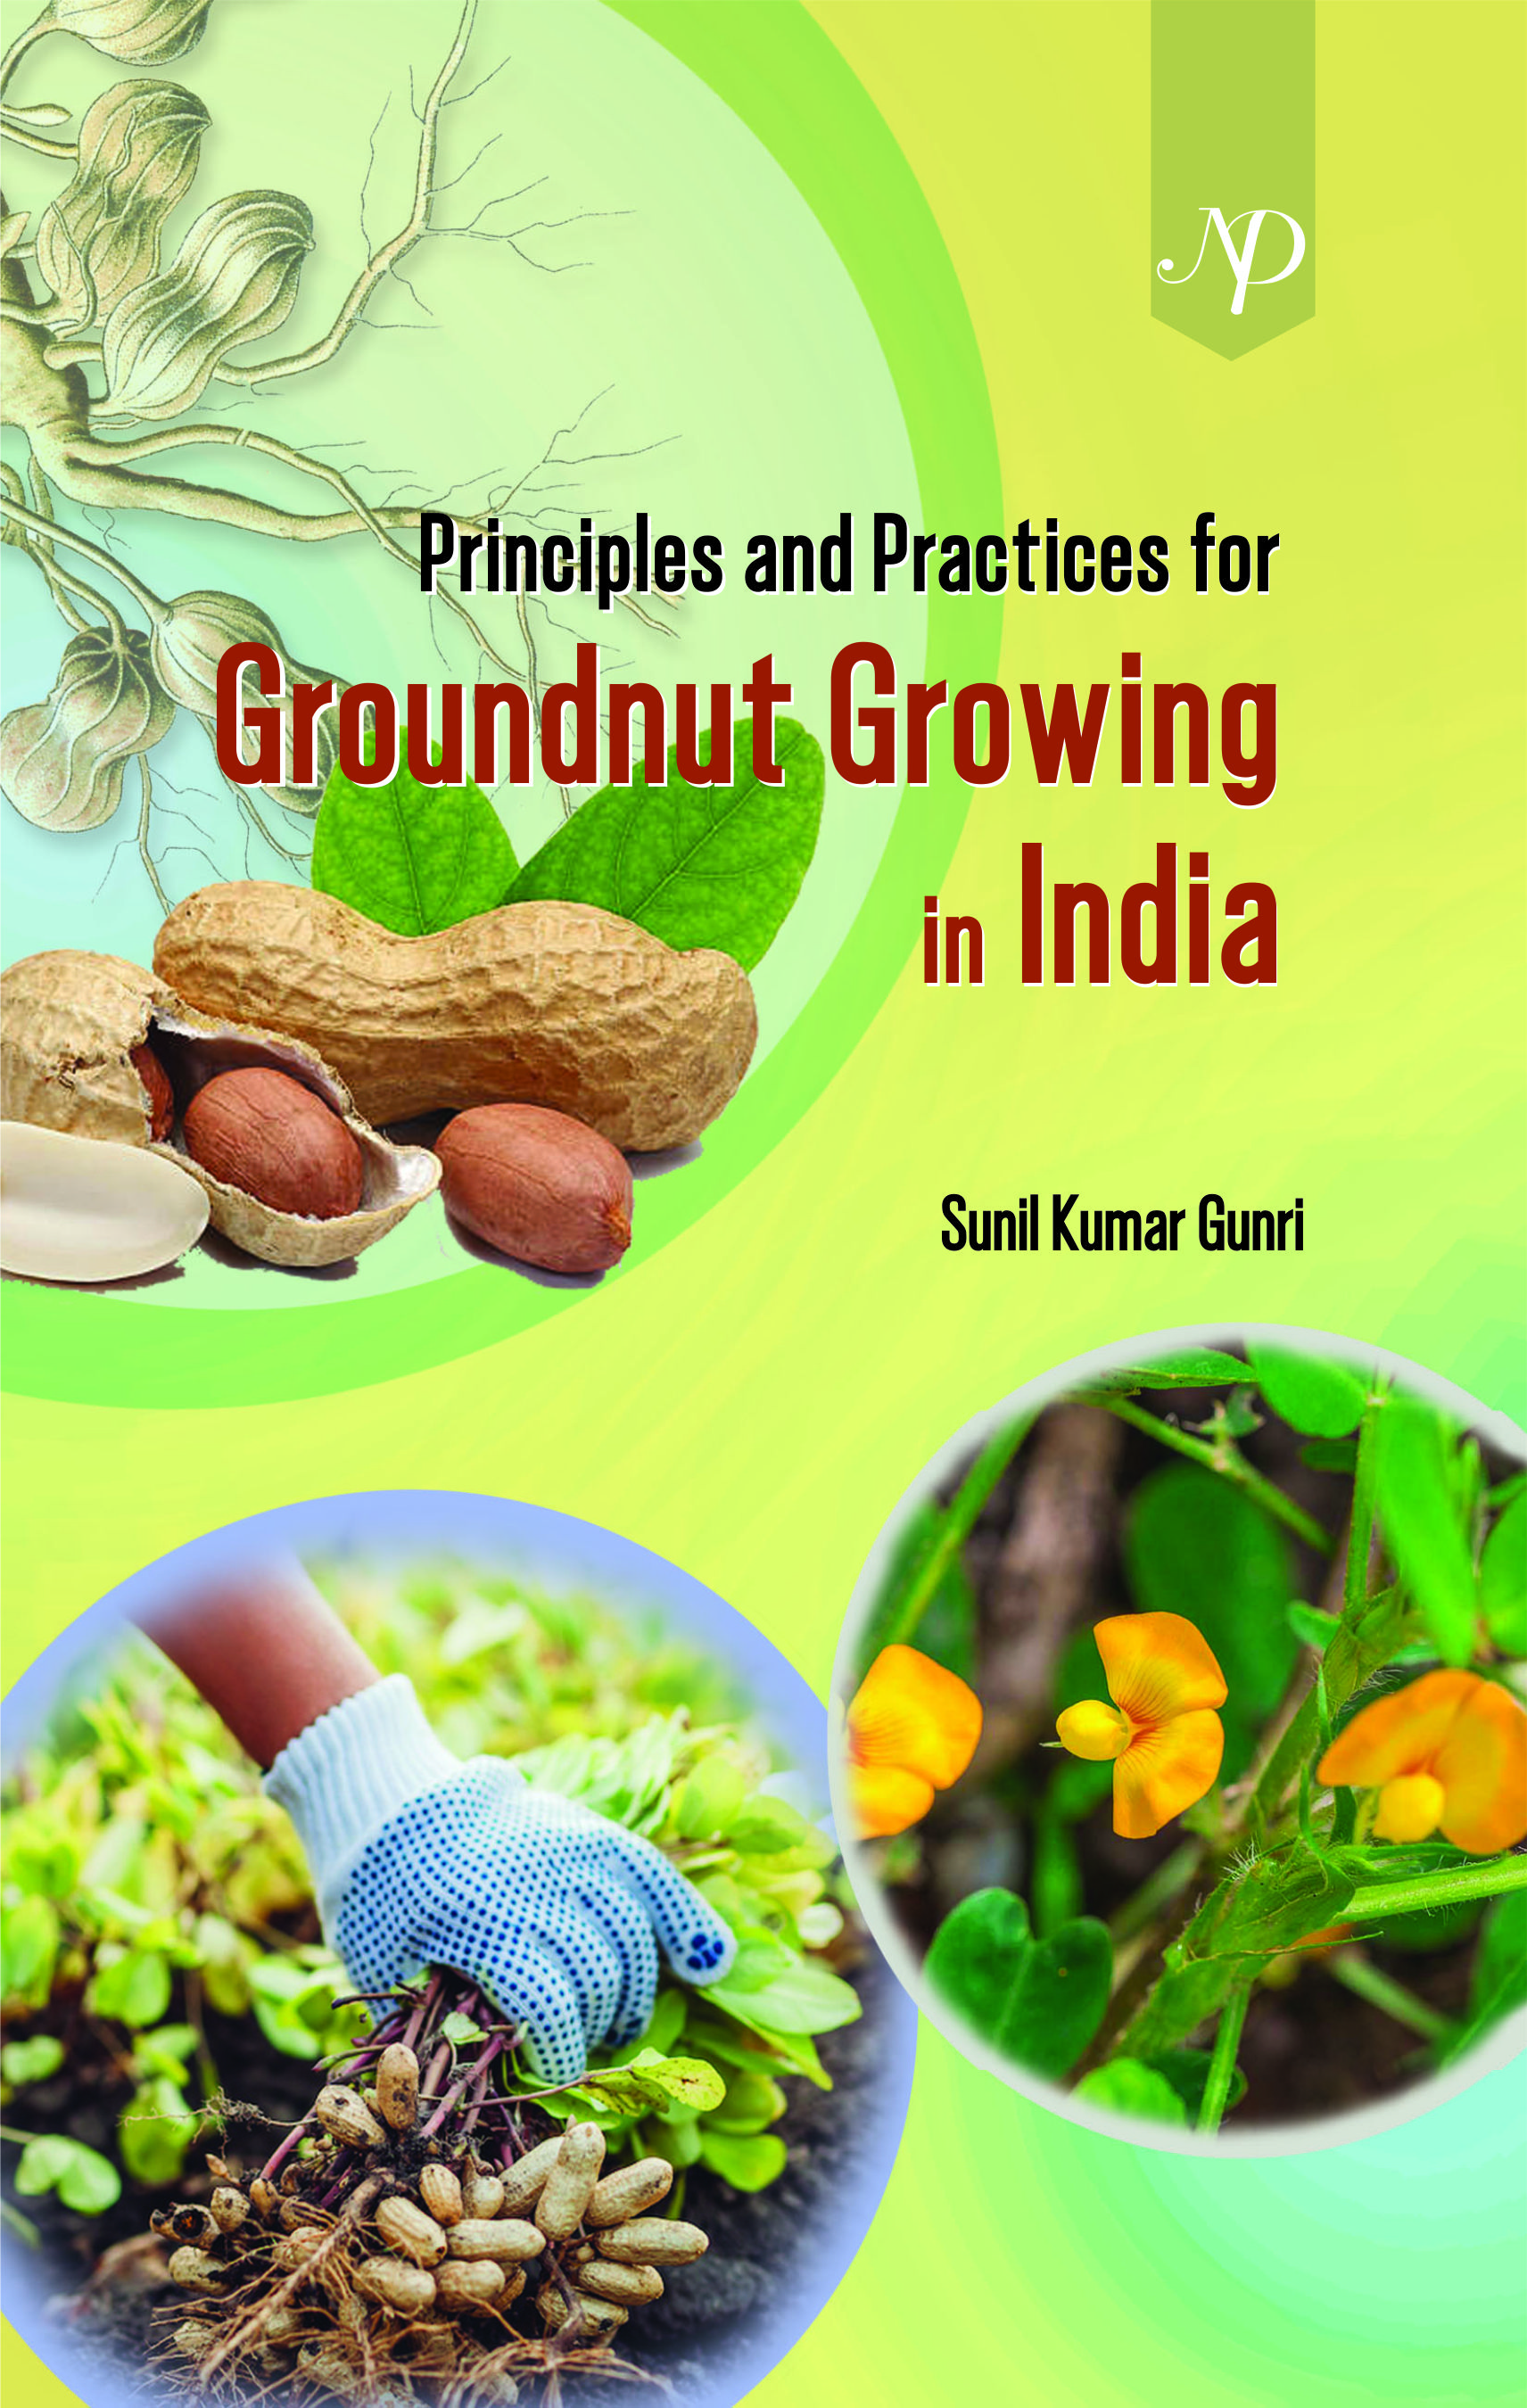 Principles and Practices for Groundnut Growing in India